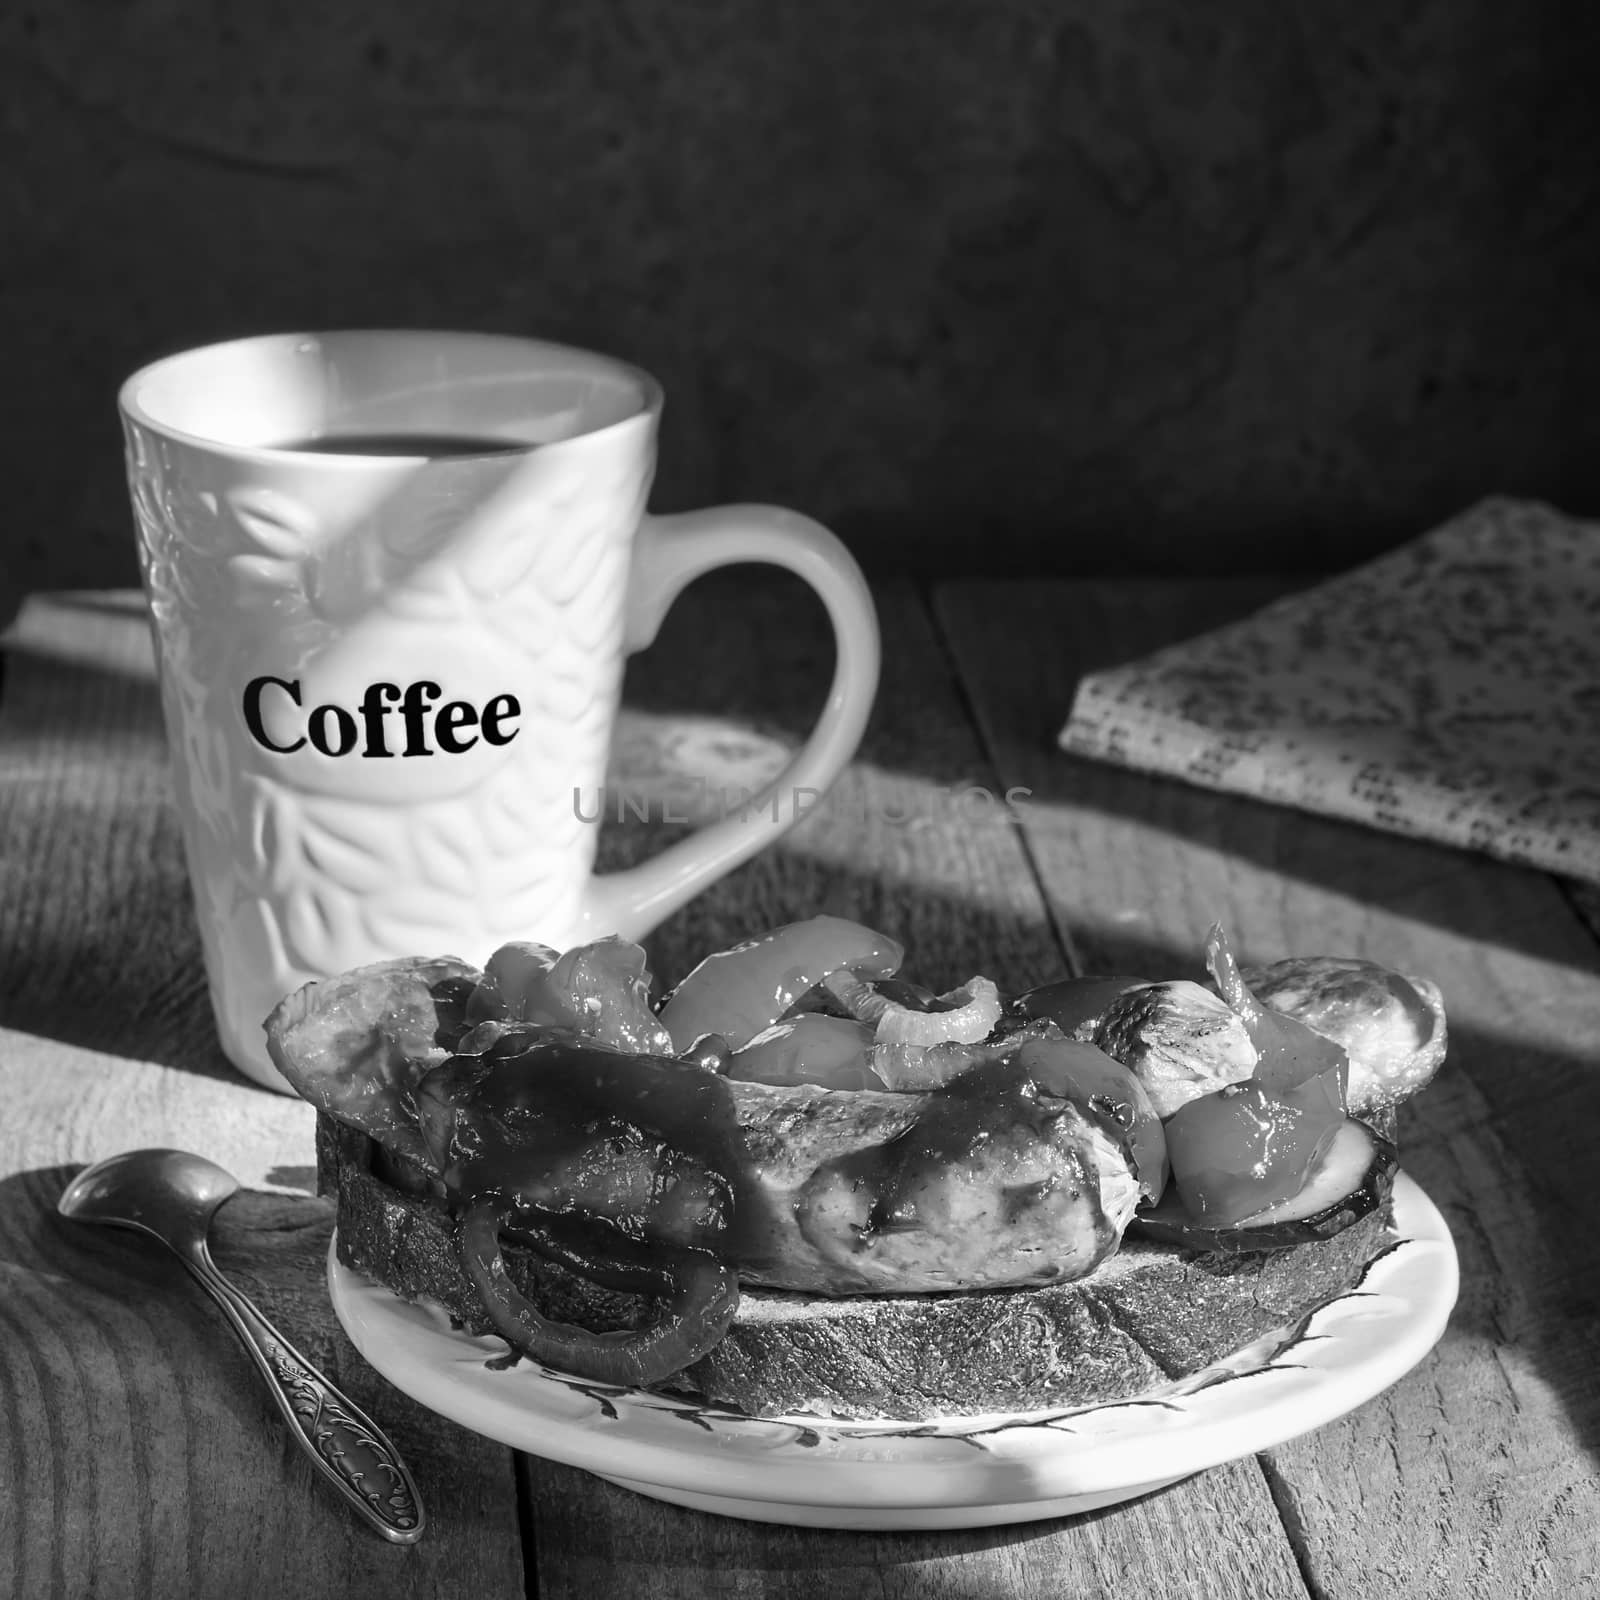 Sandwich with grilled sausages, on a plate and coffee mug on old wooden surface. Black-and-white.